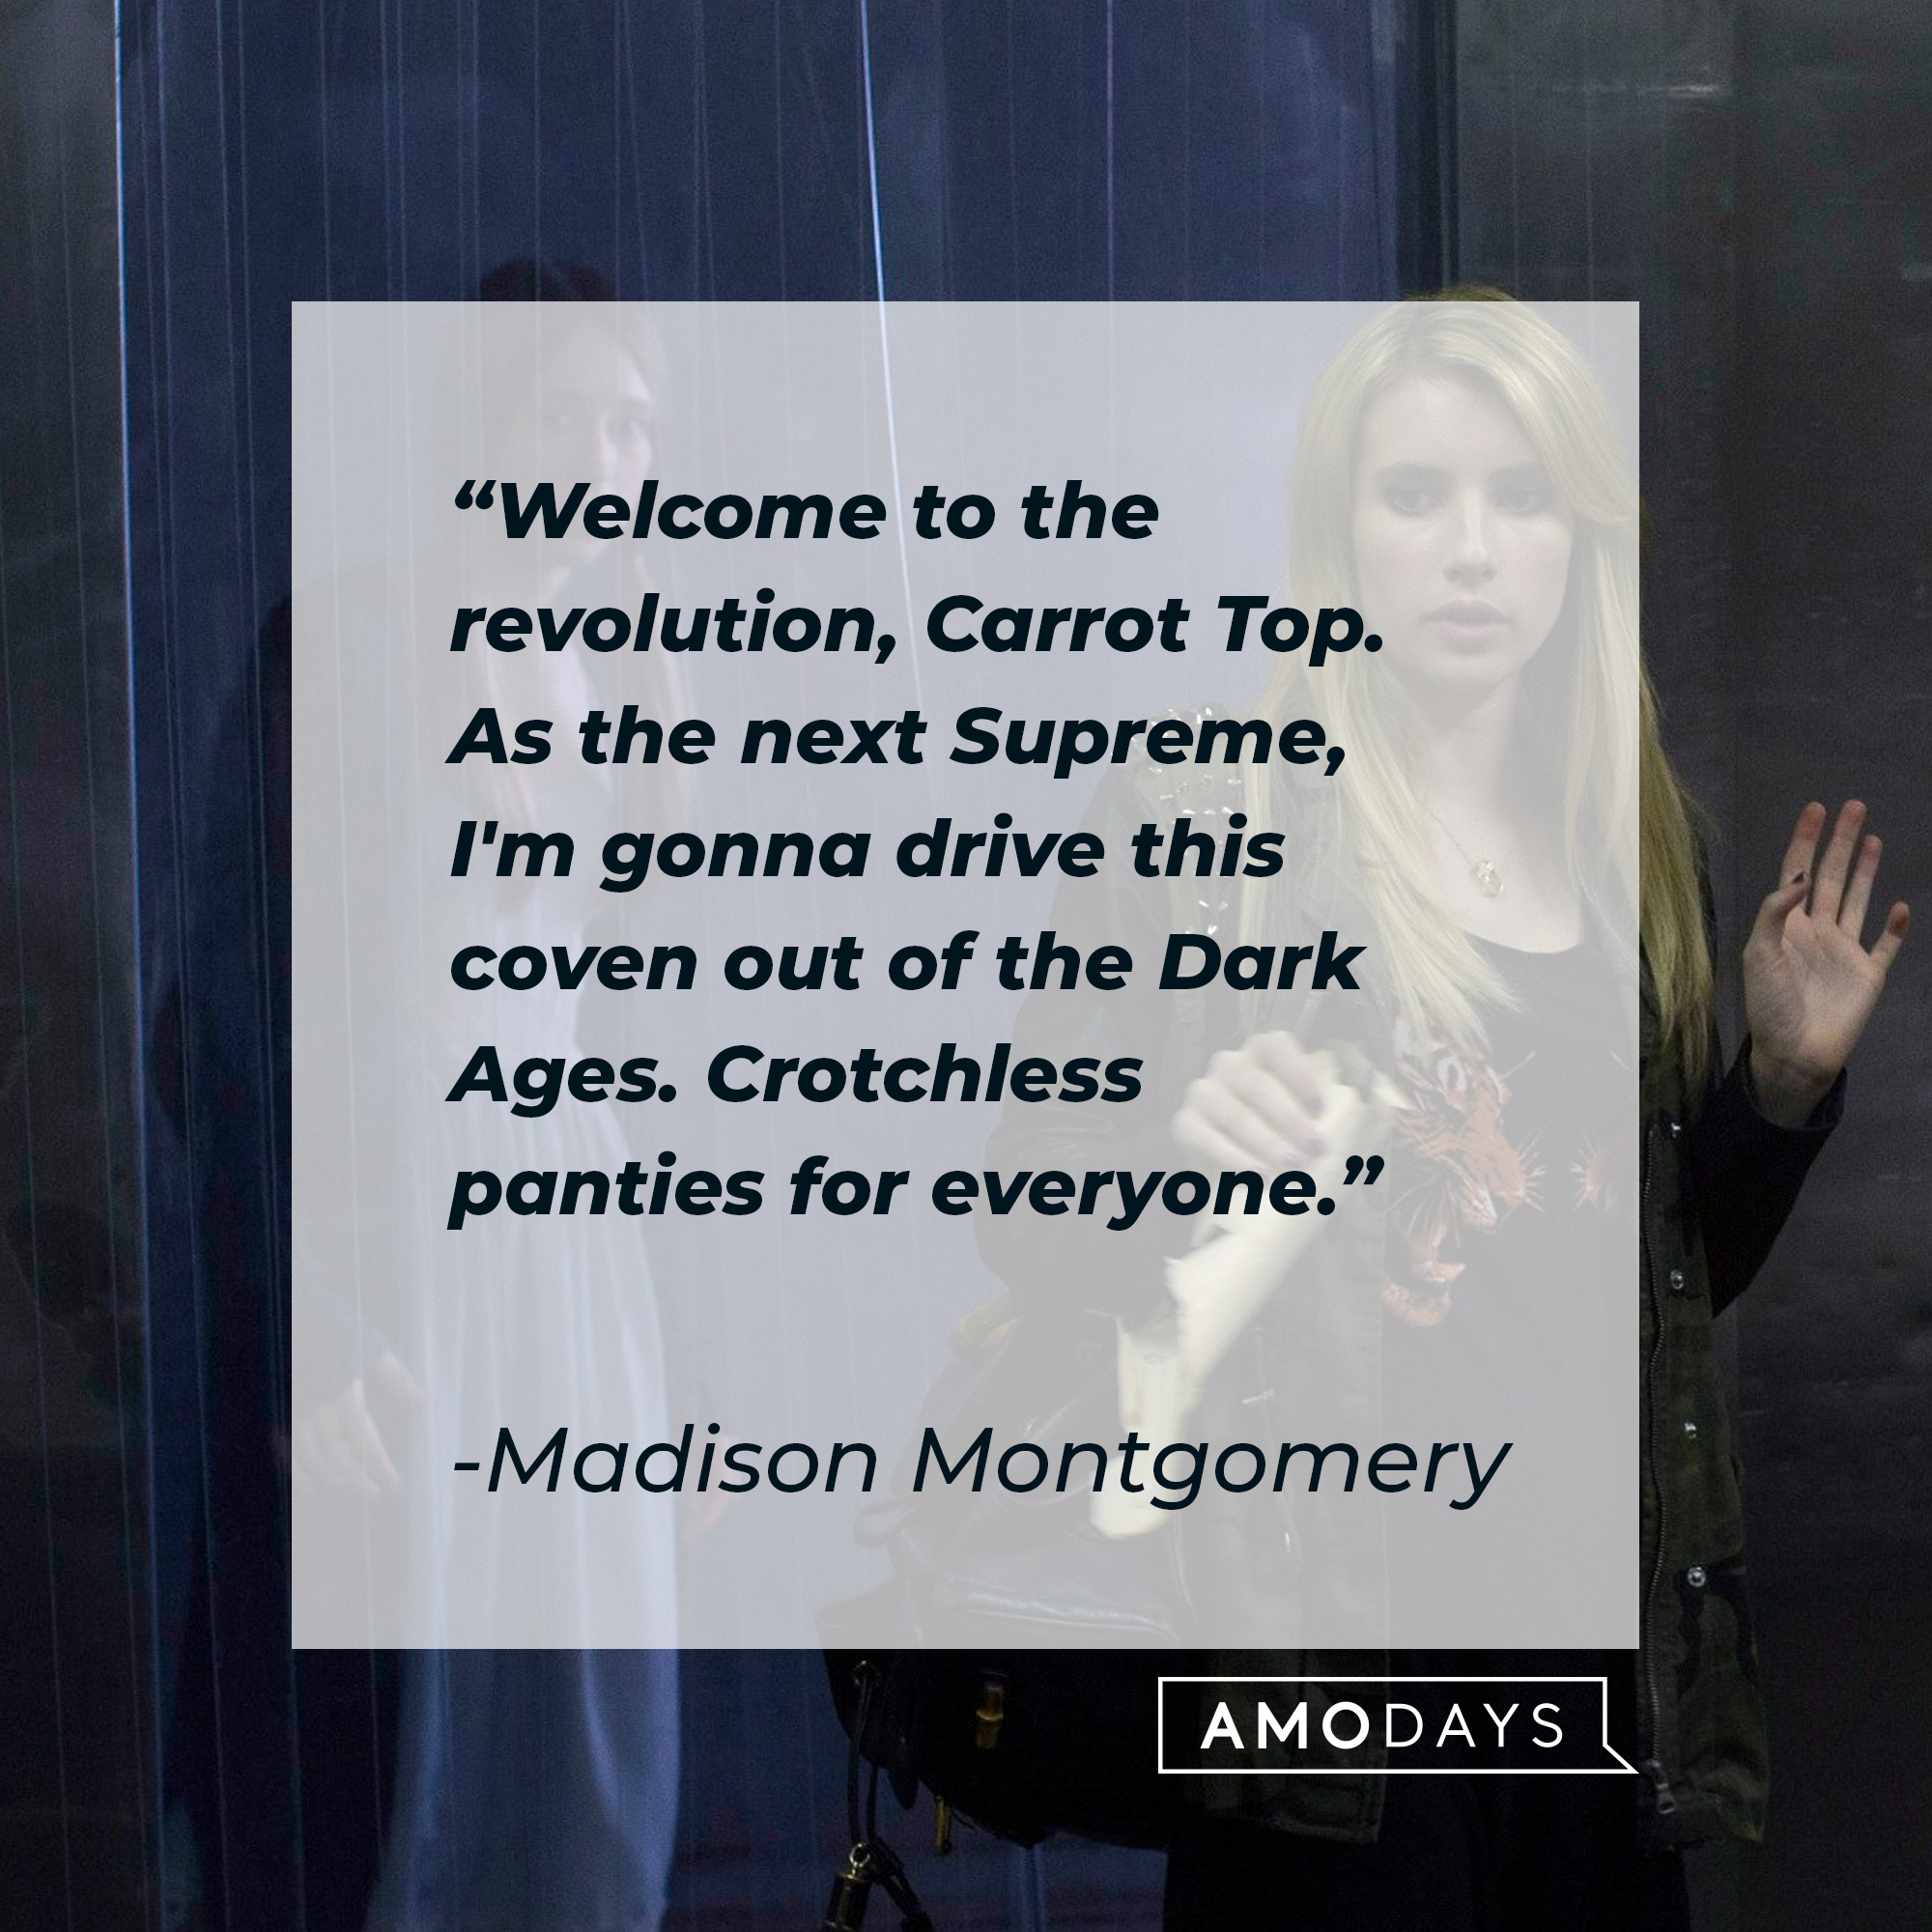 Madison's quote: "Welcome to the revolution, Carrot Top. As the next Supreme, I'm gonna drive this coven out of the Dark Ages. Crotchless panties for everyone." | Source: facebook.com/americanhorrorstory